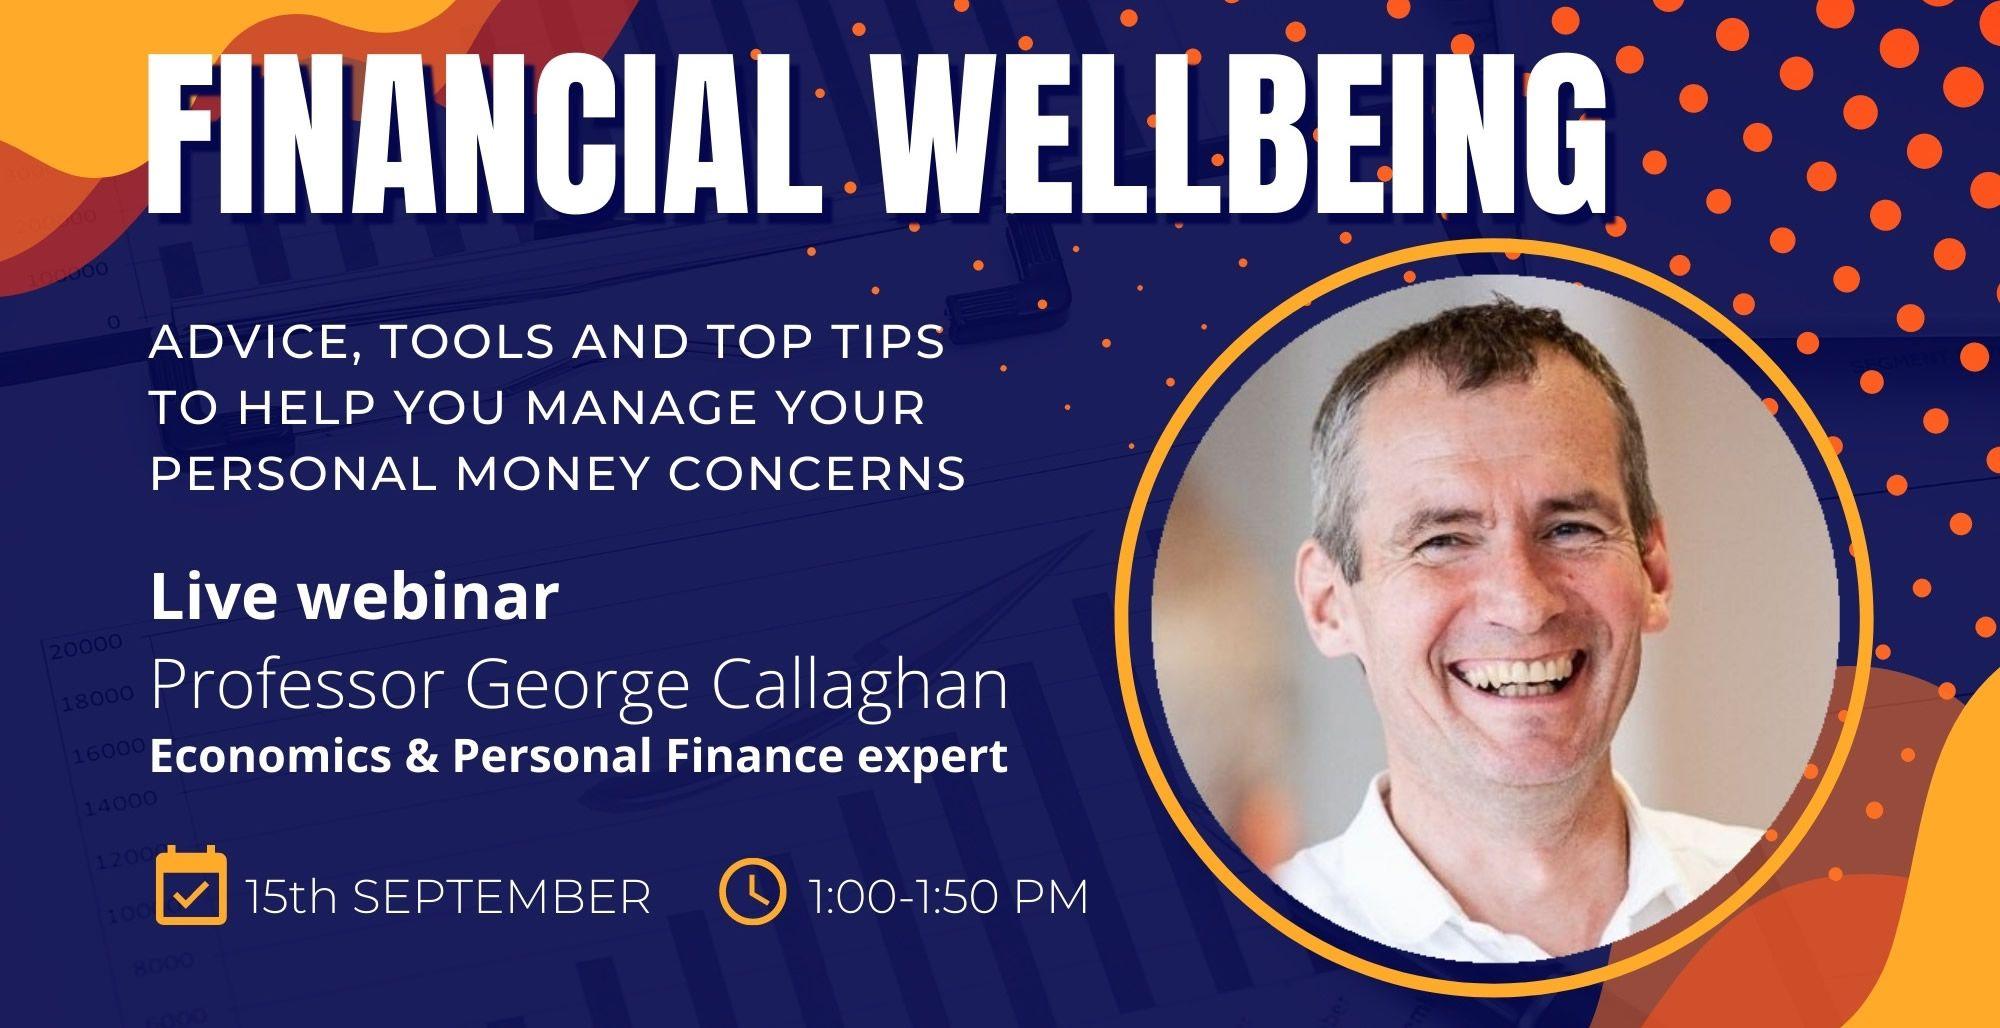 George Callaghan - Financial Wellbeing email header